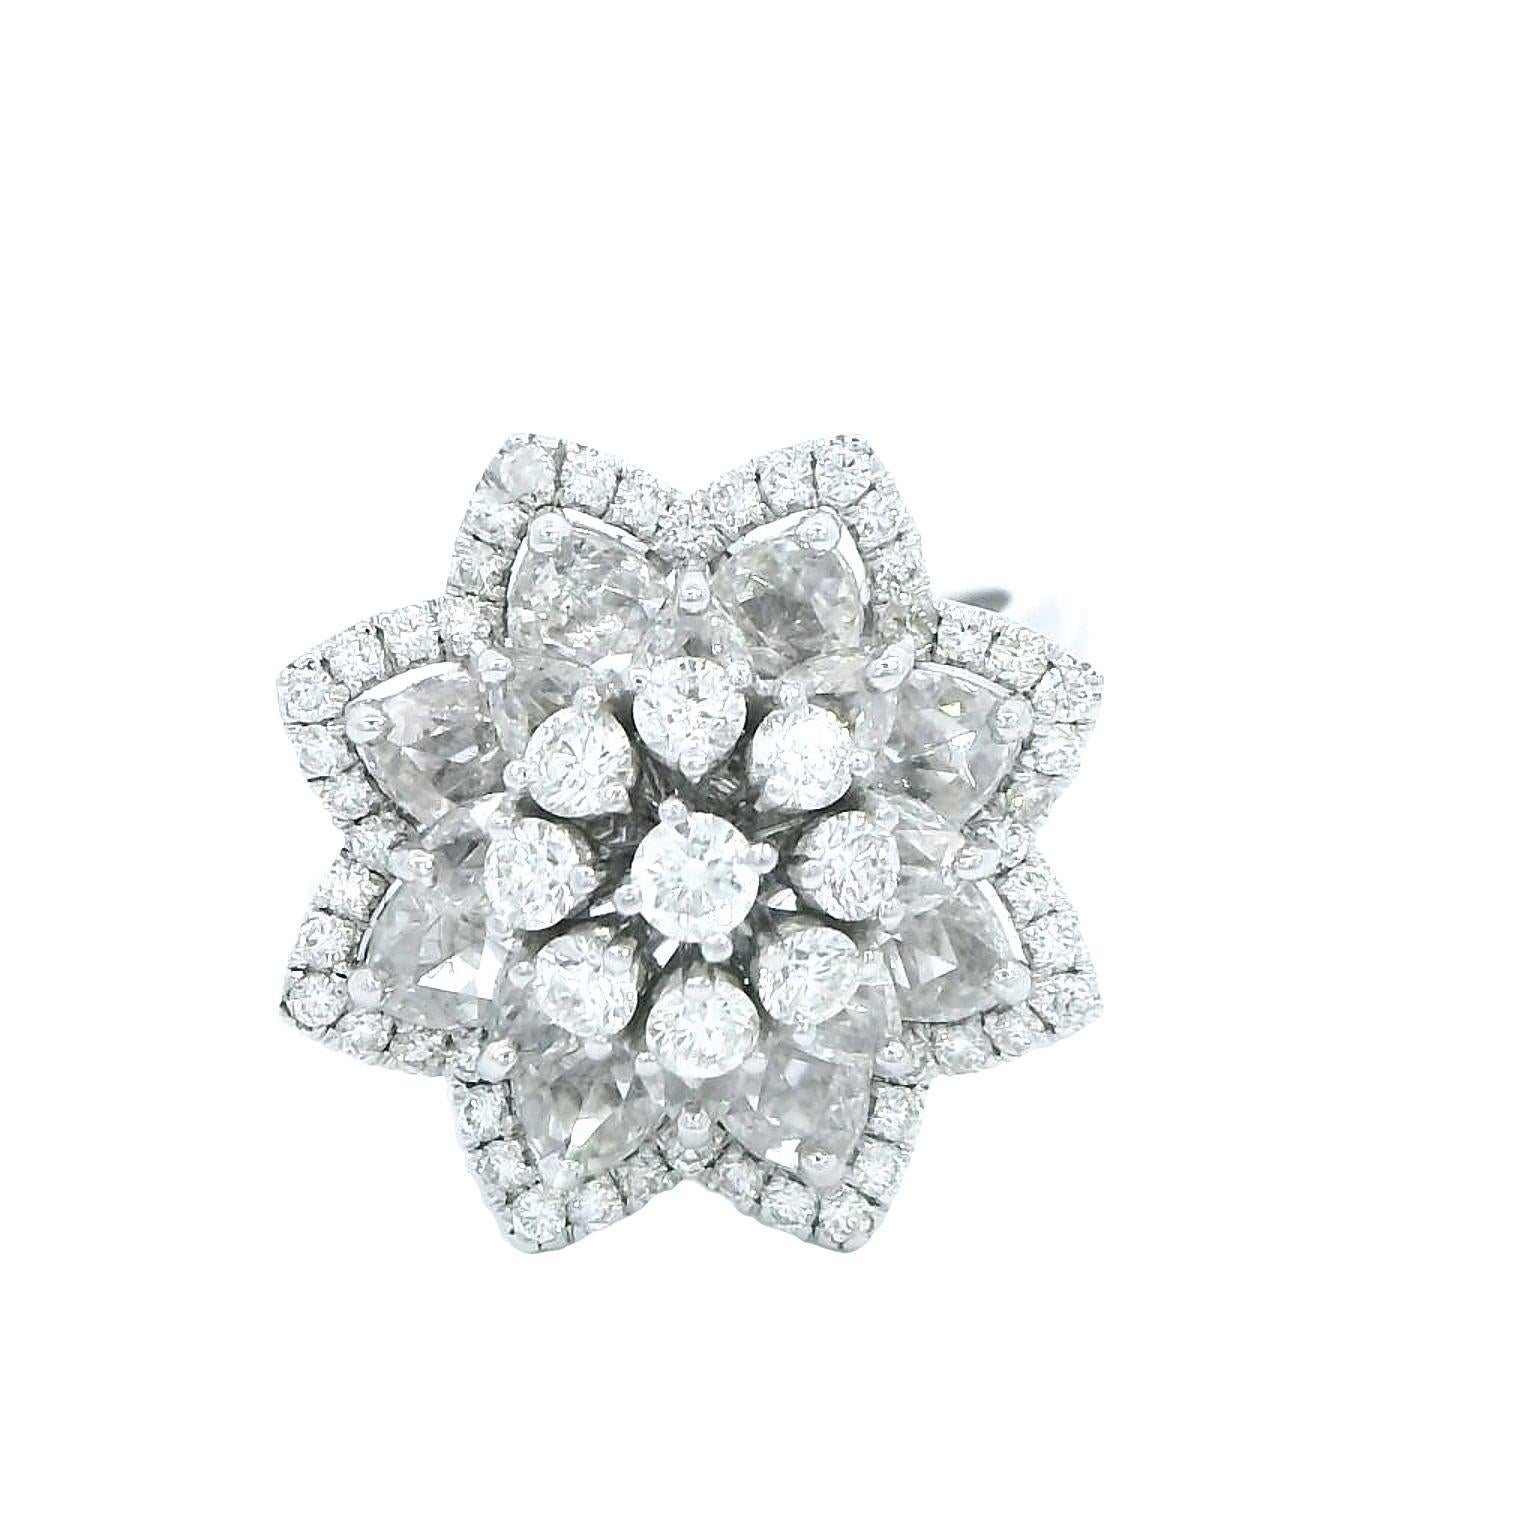 Inspired by the Lily flower, this ring has seven round brilliant cut diamonds, centered in a life like petal arrangement made from rose cut diamonds. A delicate feminine ring to define the joy of being a woman, and in the best way possible; with